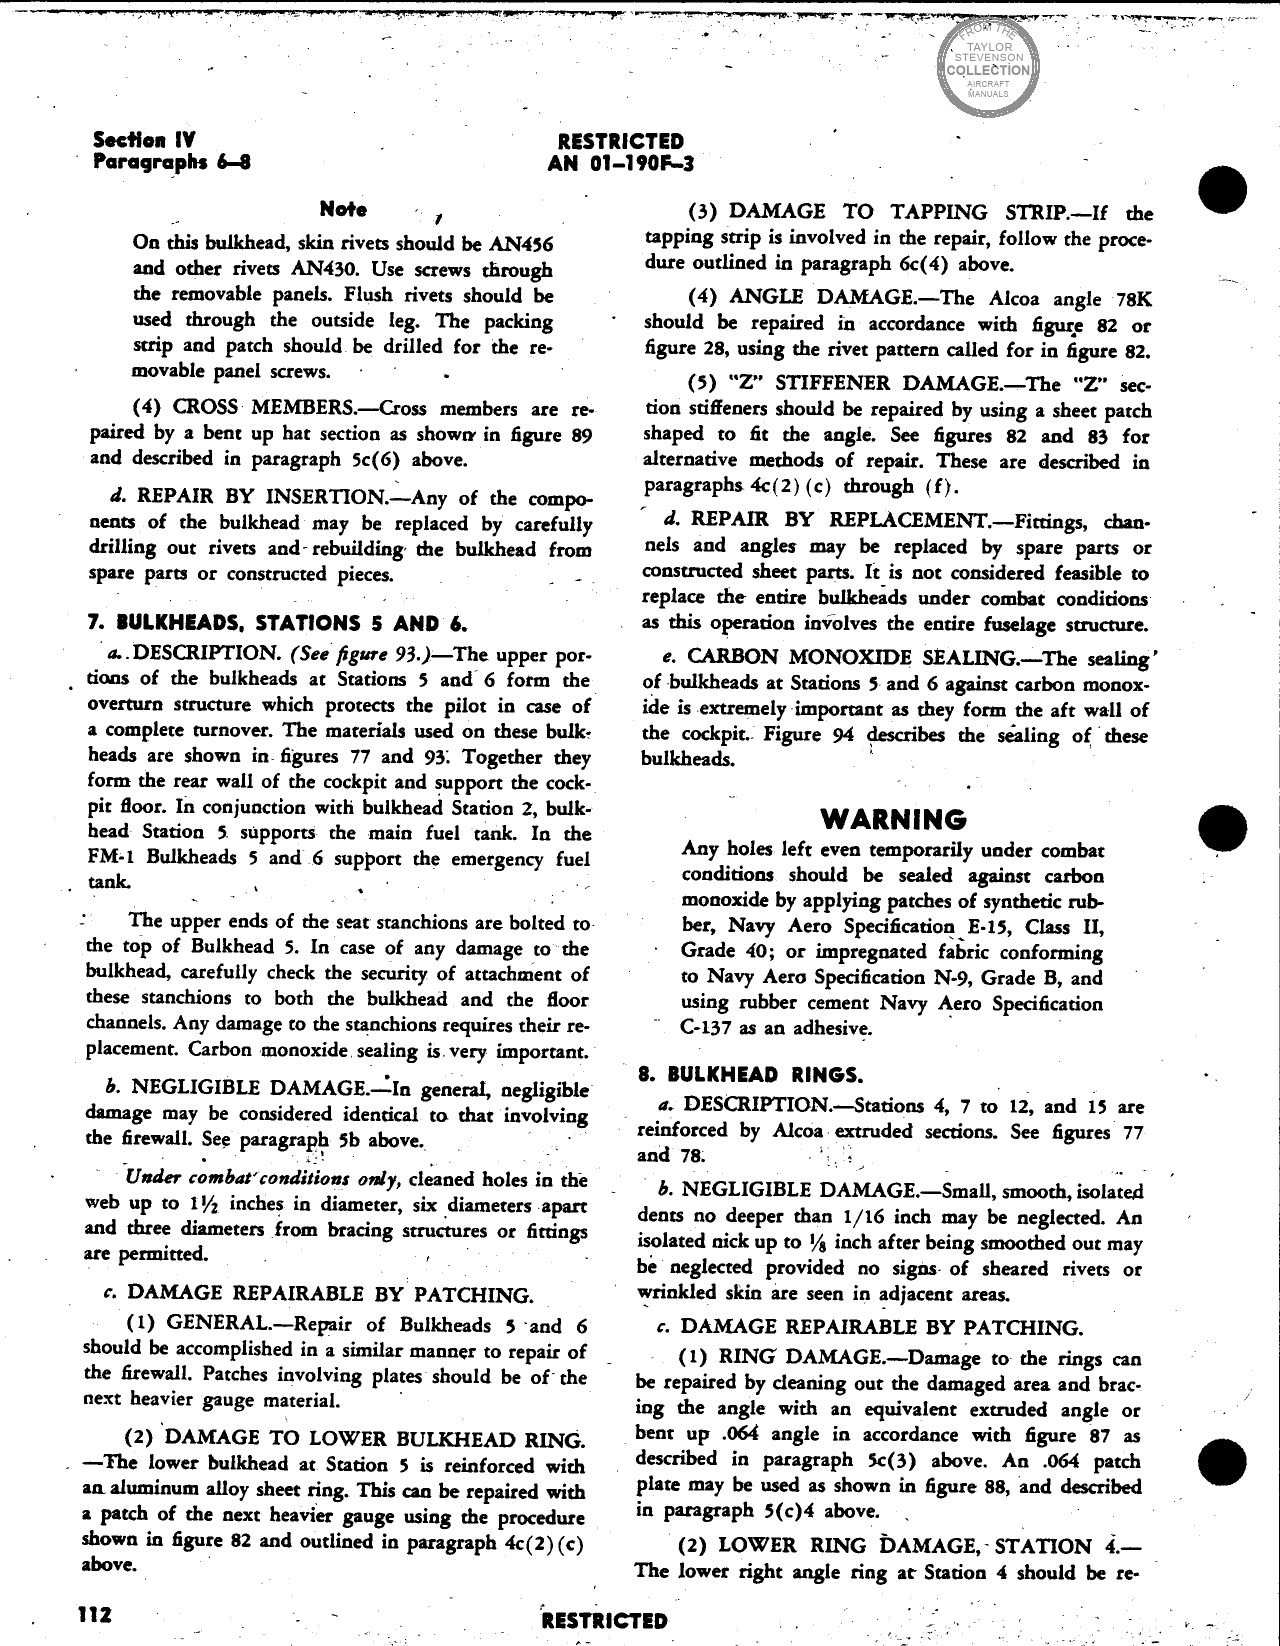 Sample page 122 from AirCorps Library document: Handbook of Instructions for Structural Repair for FM-1 and FM-2 Wildcat